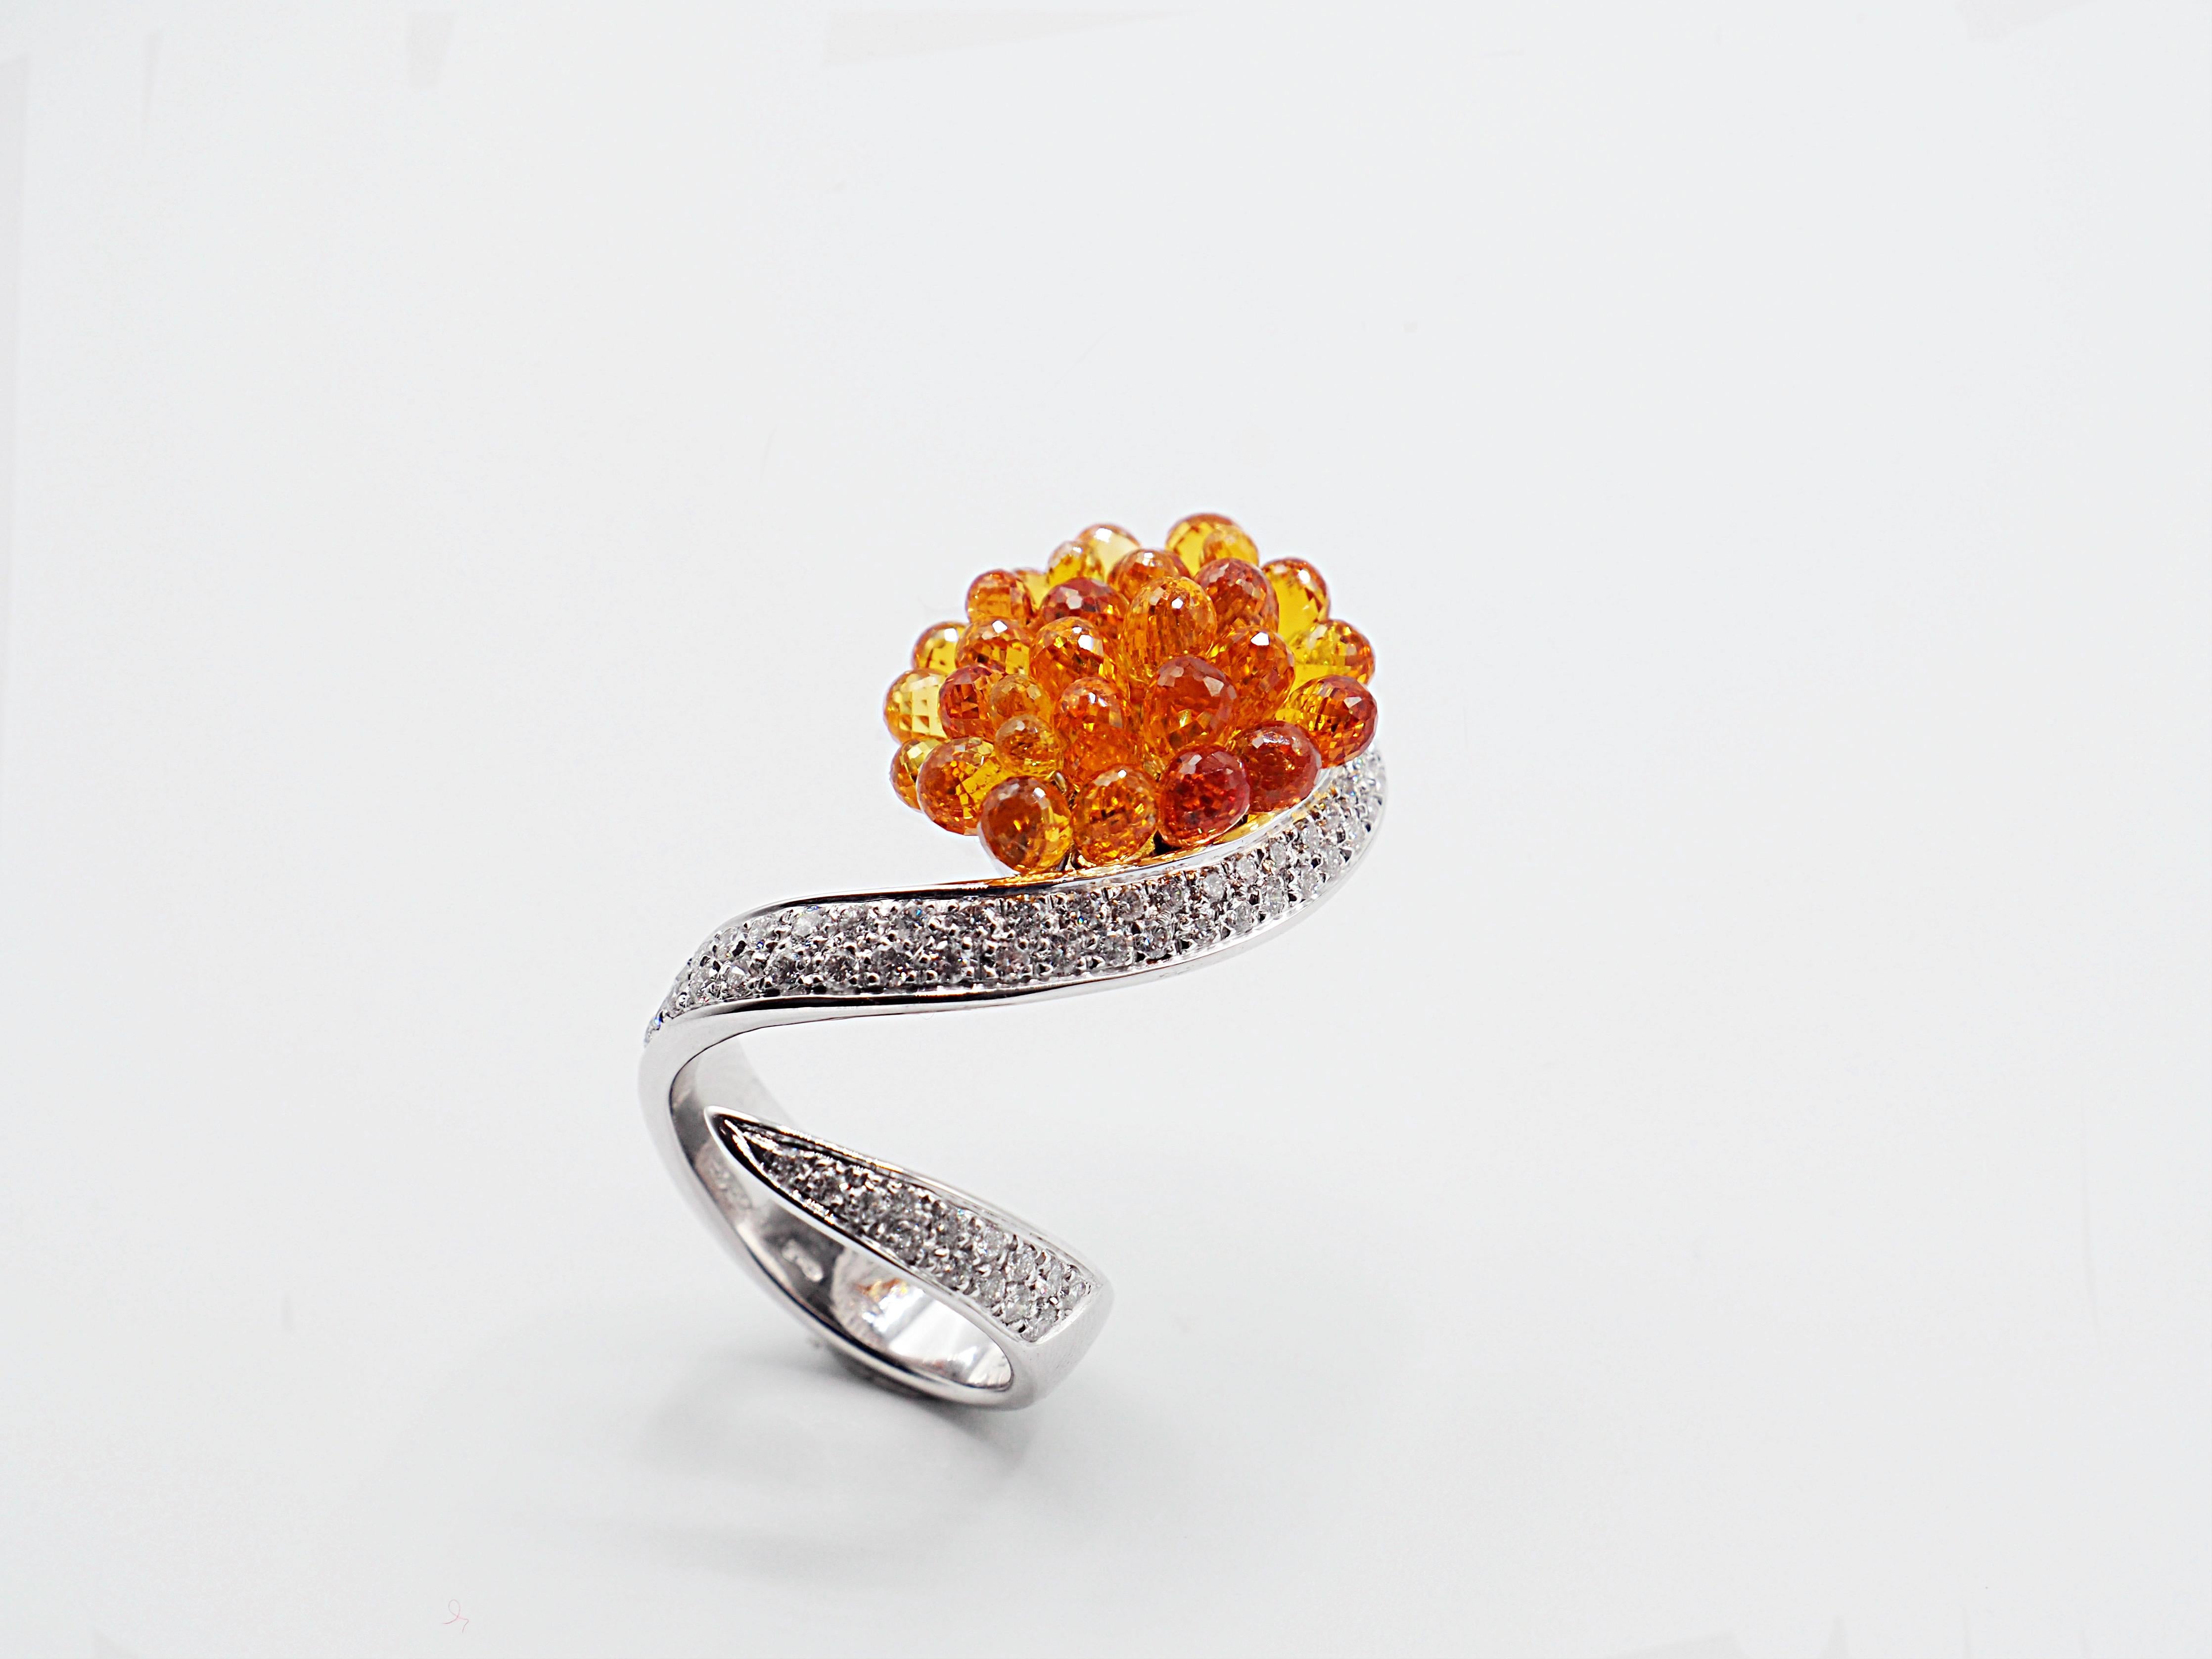 Bright briolette cut orange sapphires swing from an elegant structure in white gold, studded with a diamonds pave
Diamonds pave total ct. 1,43
Sapphires total ct. 20,87
Ring size: EU 16 (Resizable 2/3 sizes)